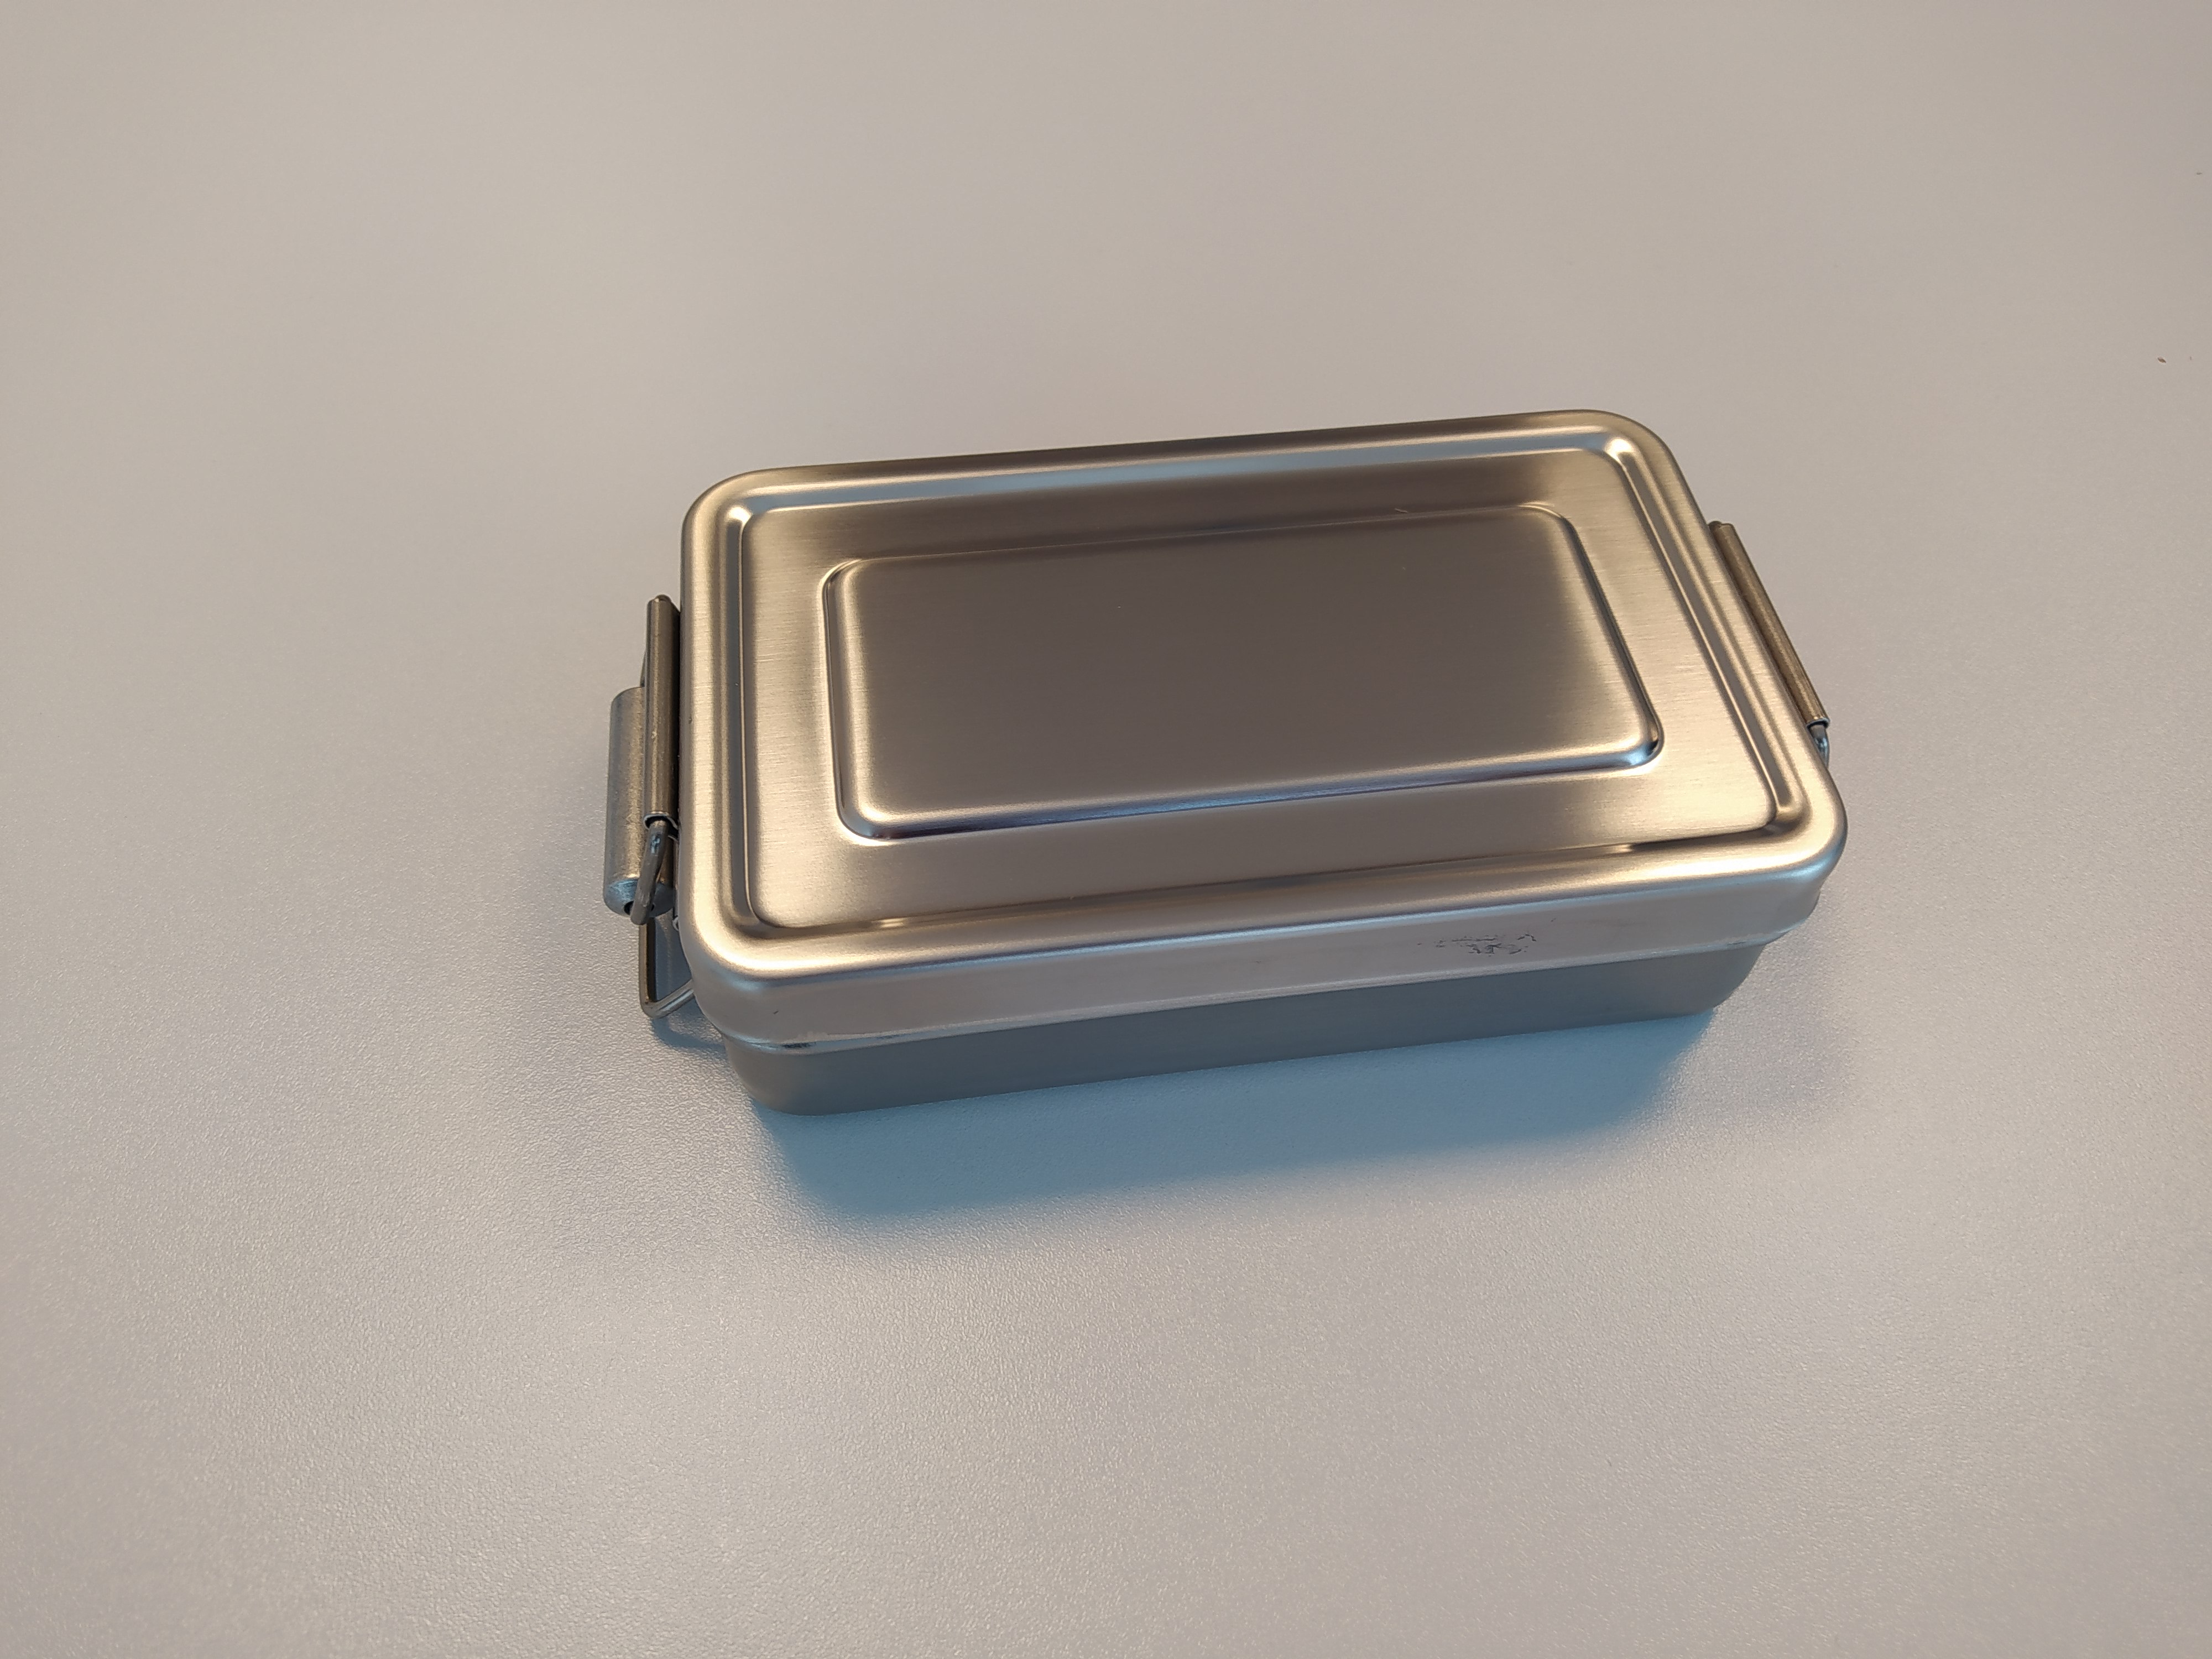 Sterilcontainer, 150x90x40 mm